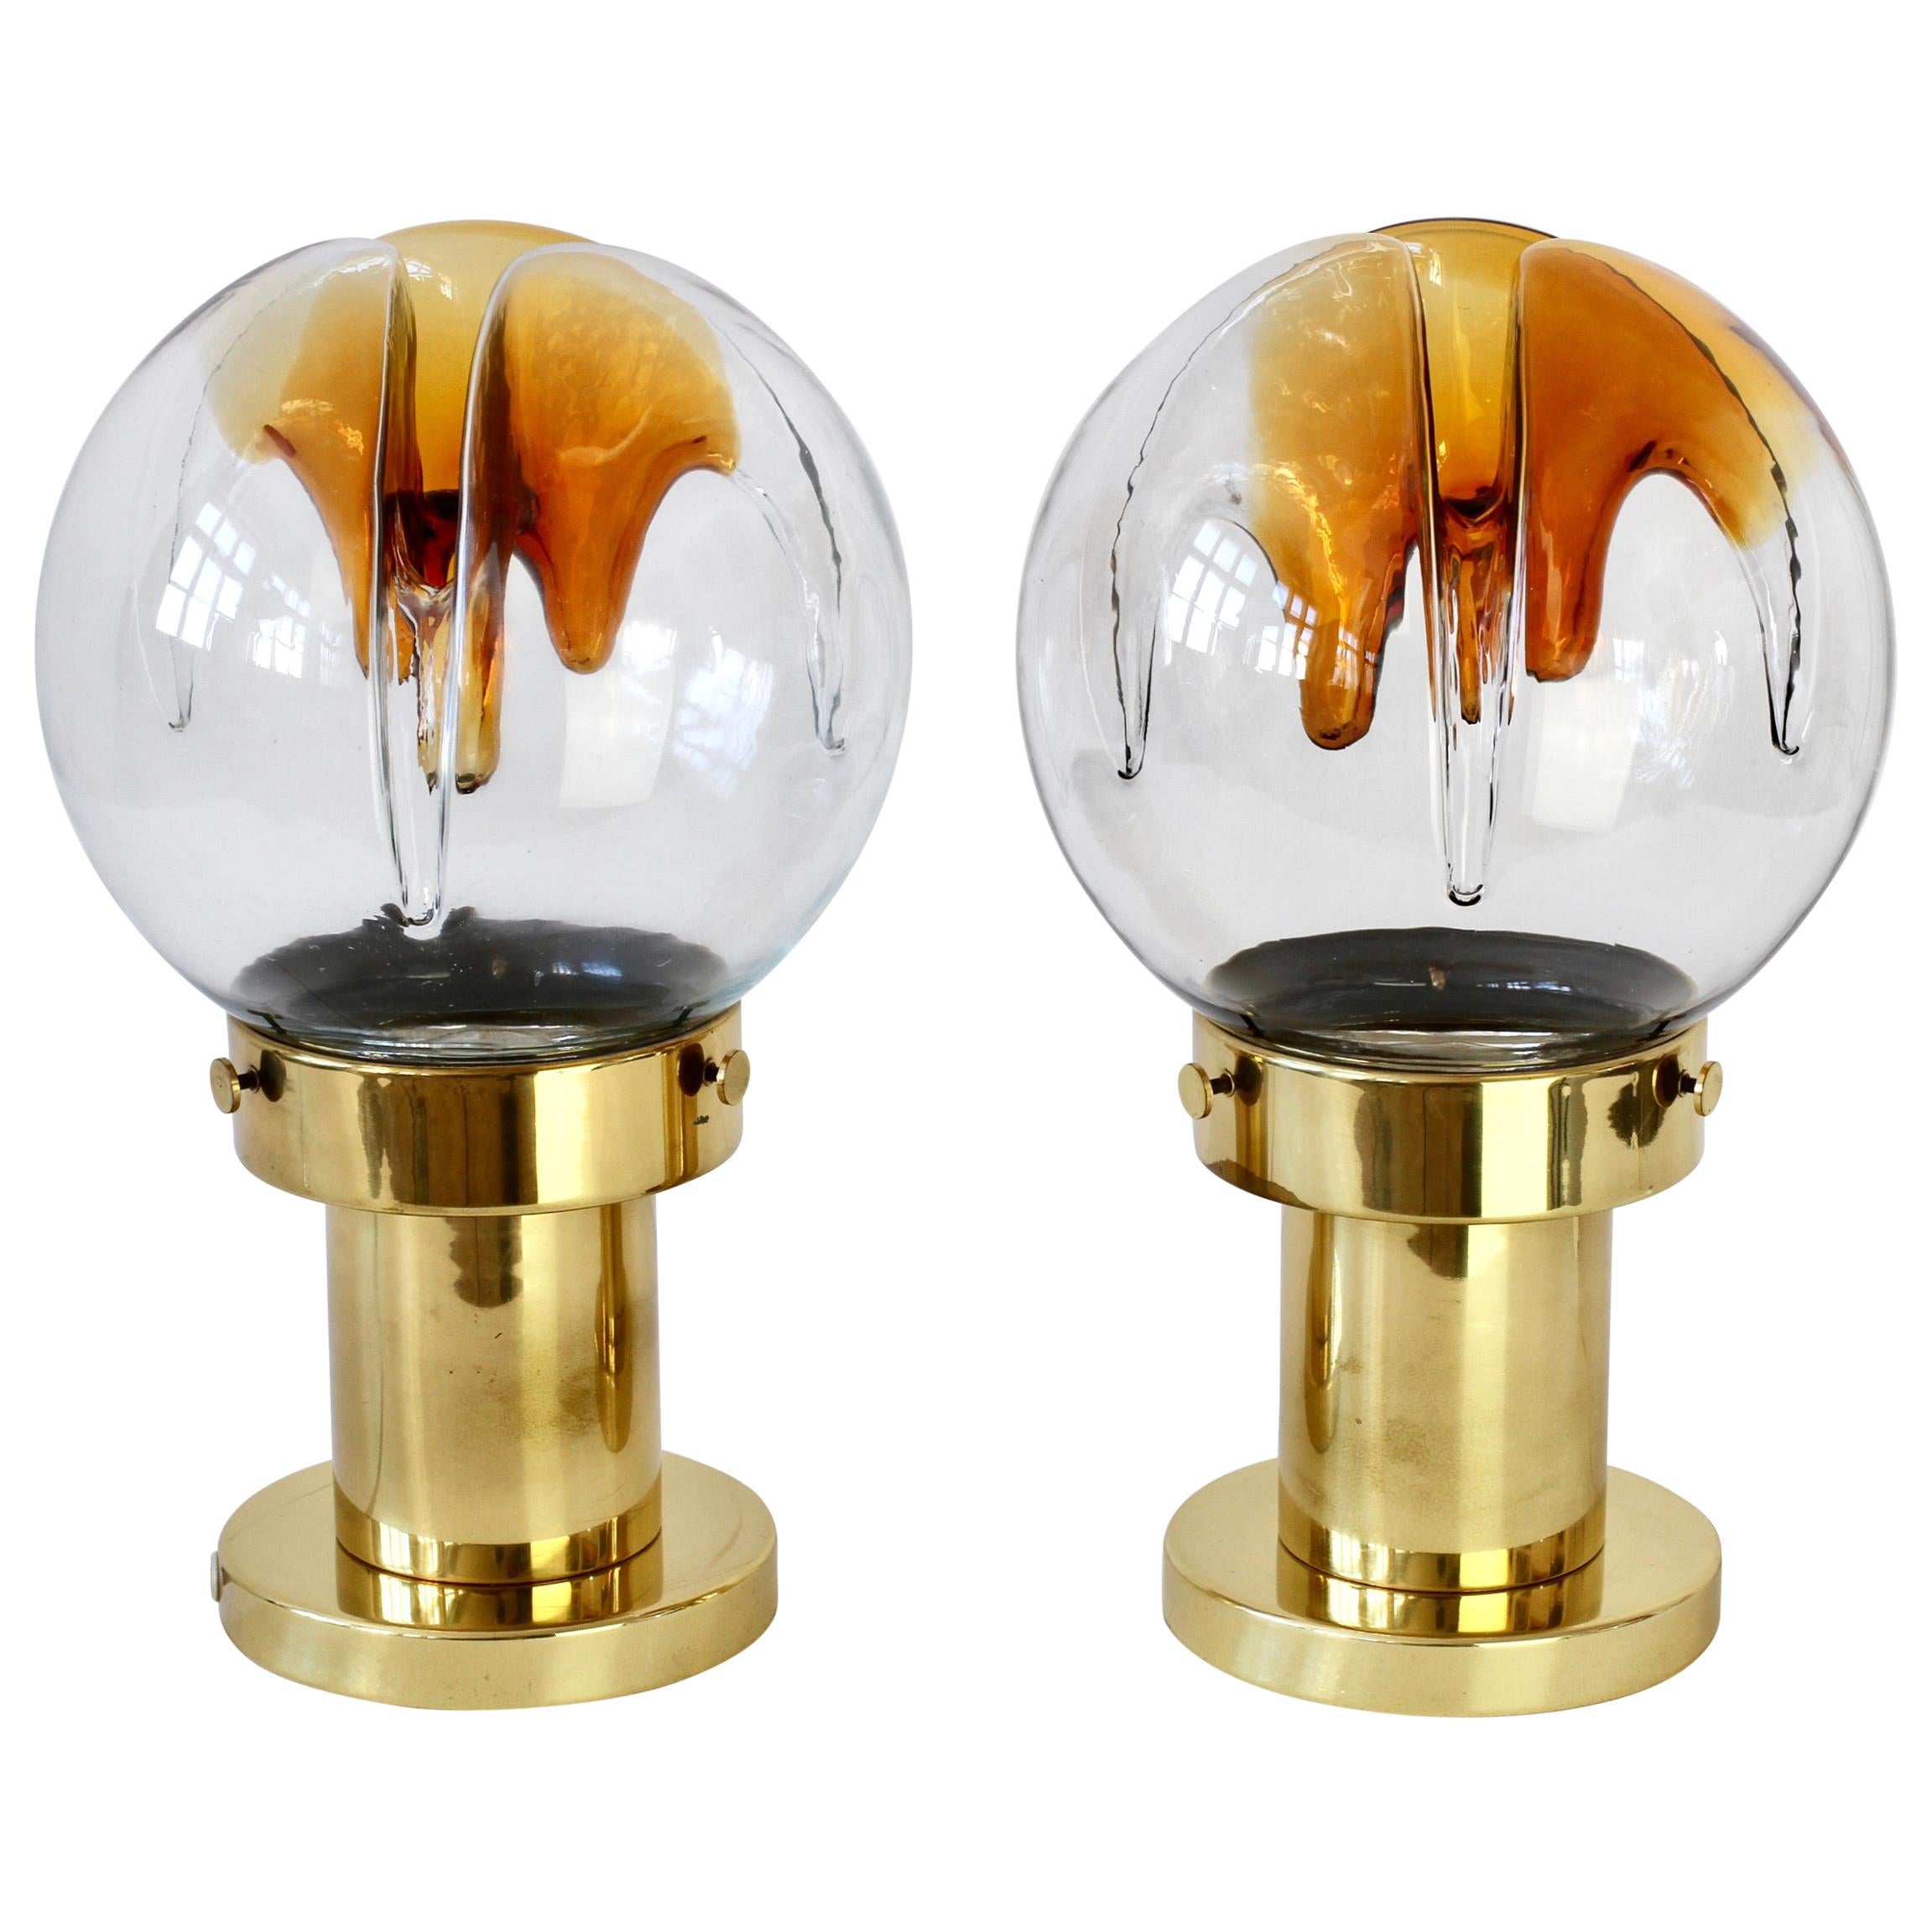 Rare Pair of Large Italian Textured Murano Glass Table Lamps by Kaiser Leuchten For Sale